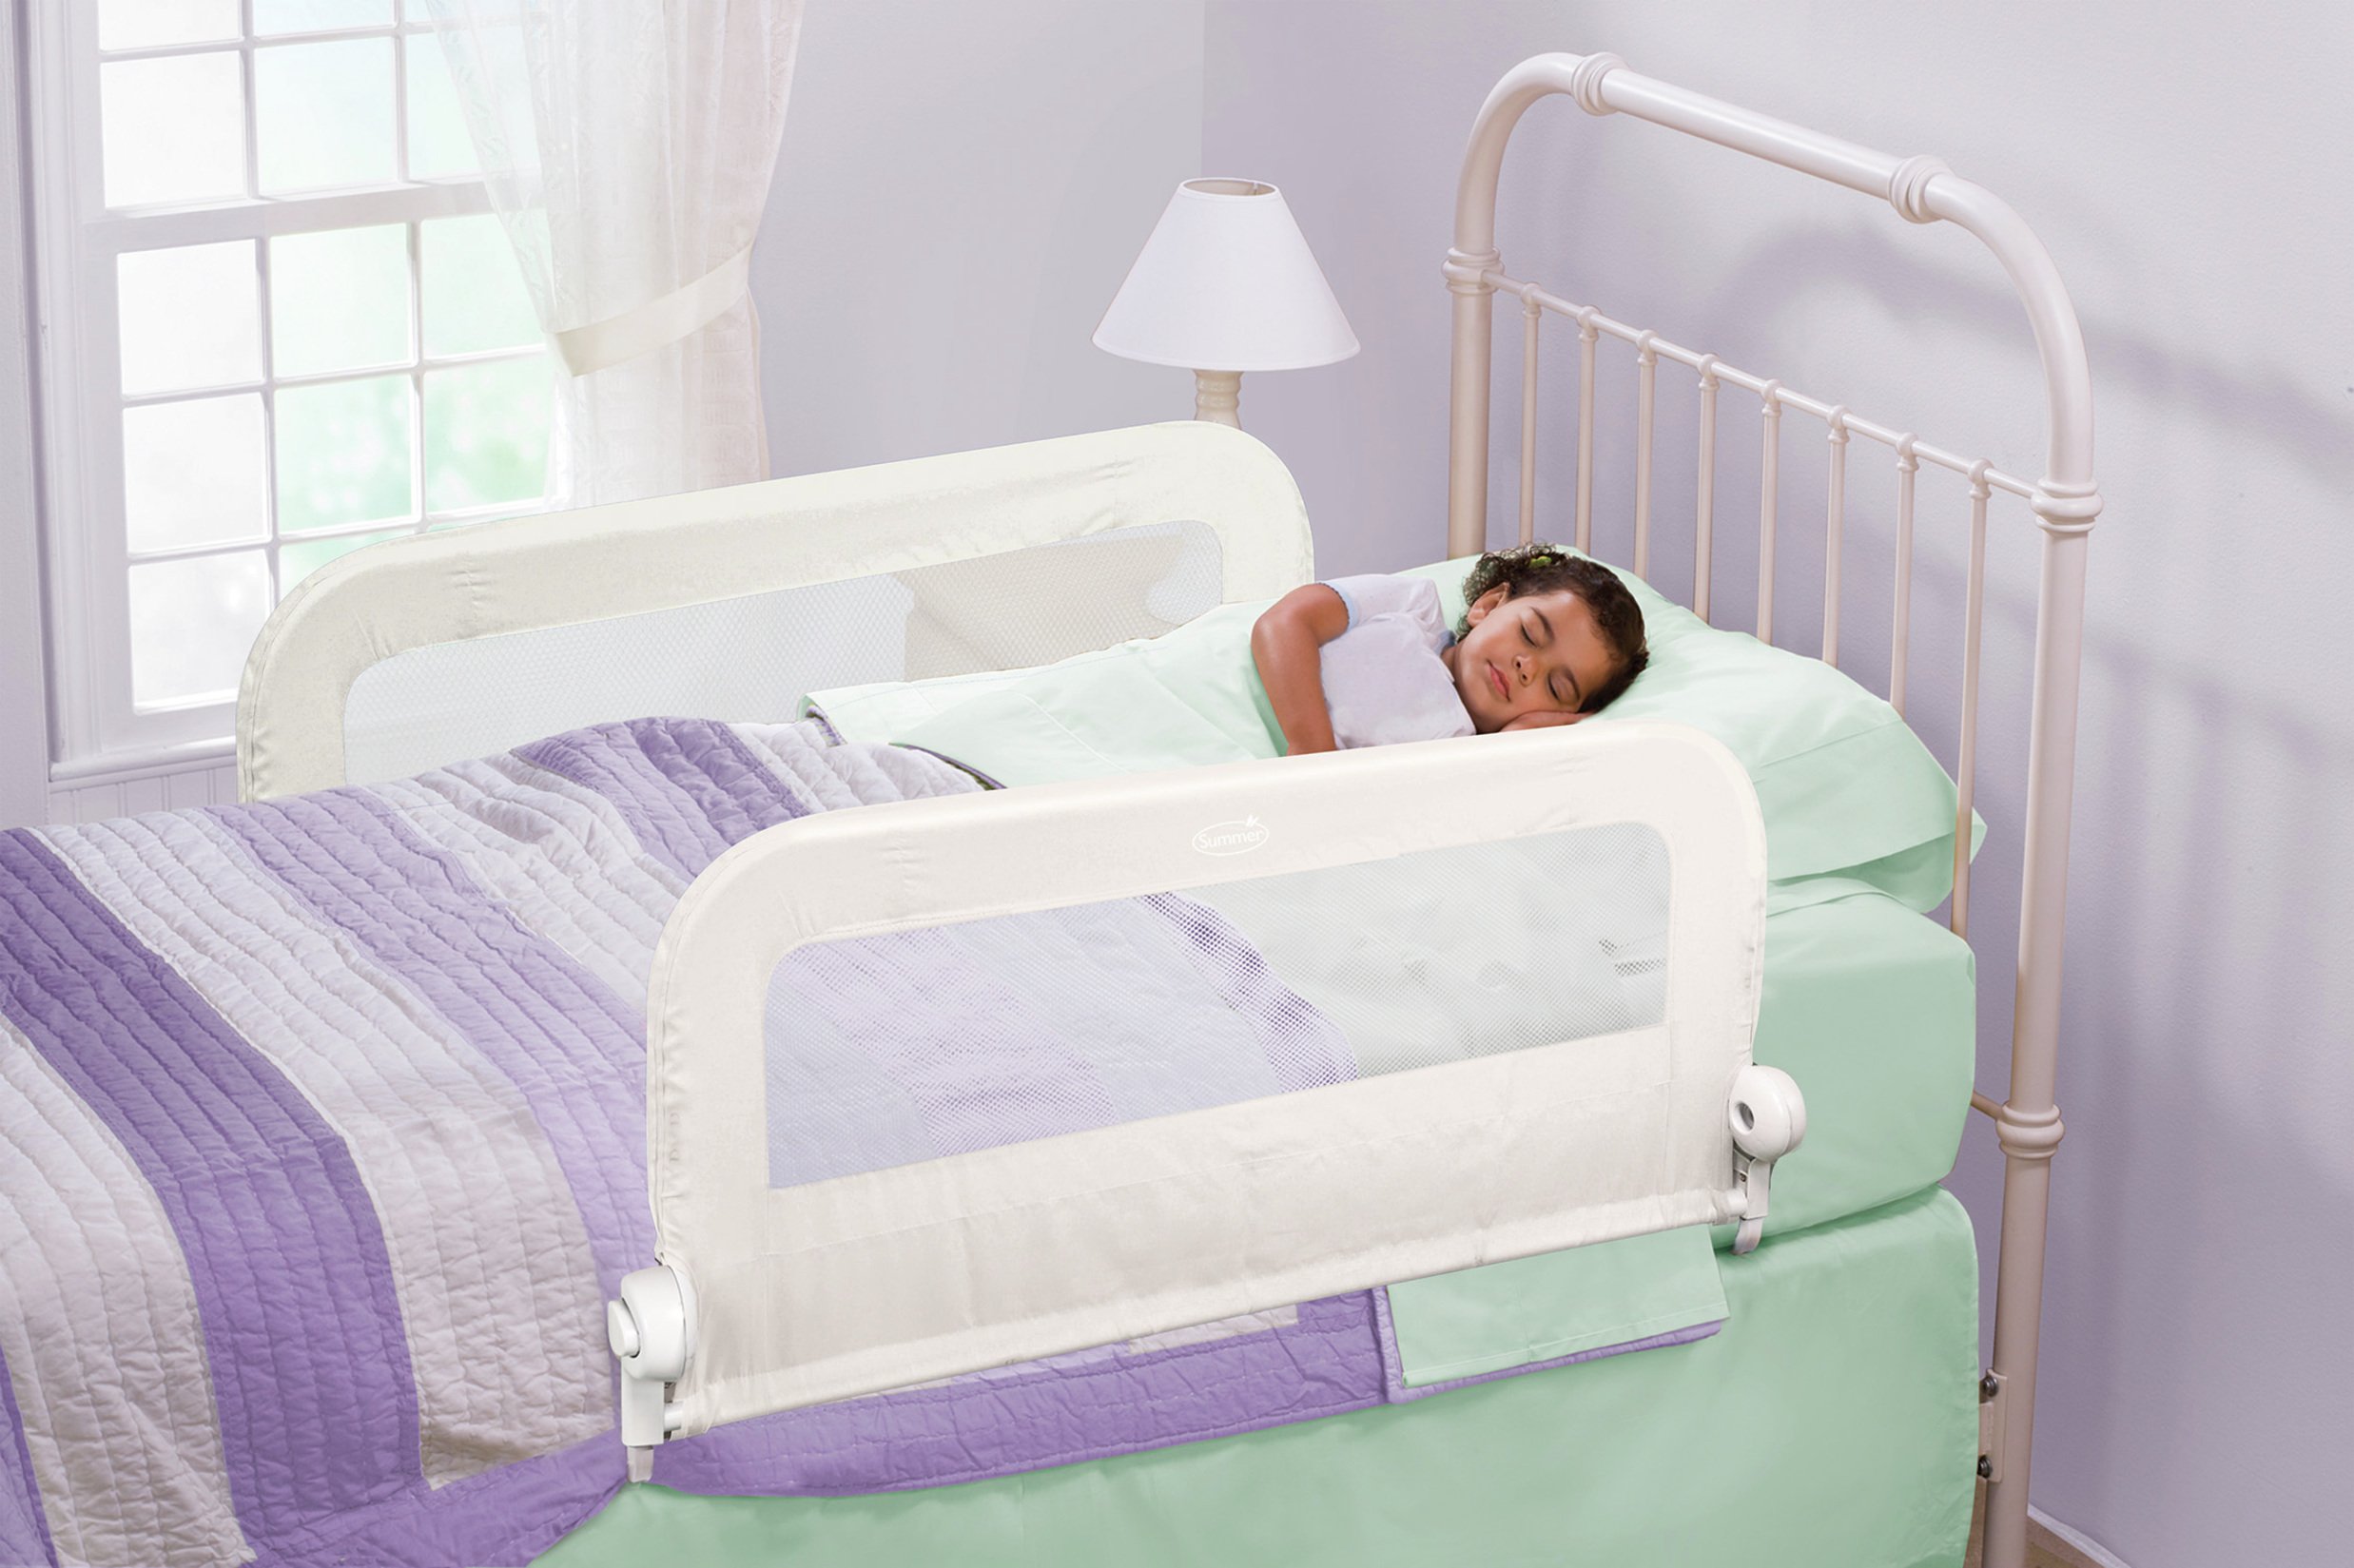 Summer Infant Grow With Me Double Bed Rail - White